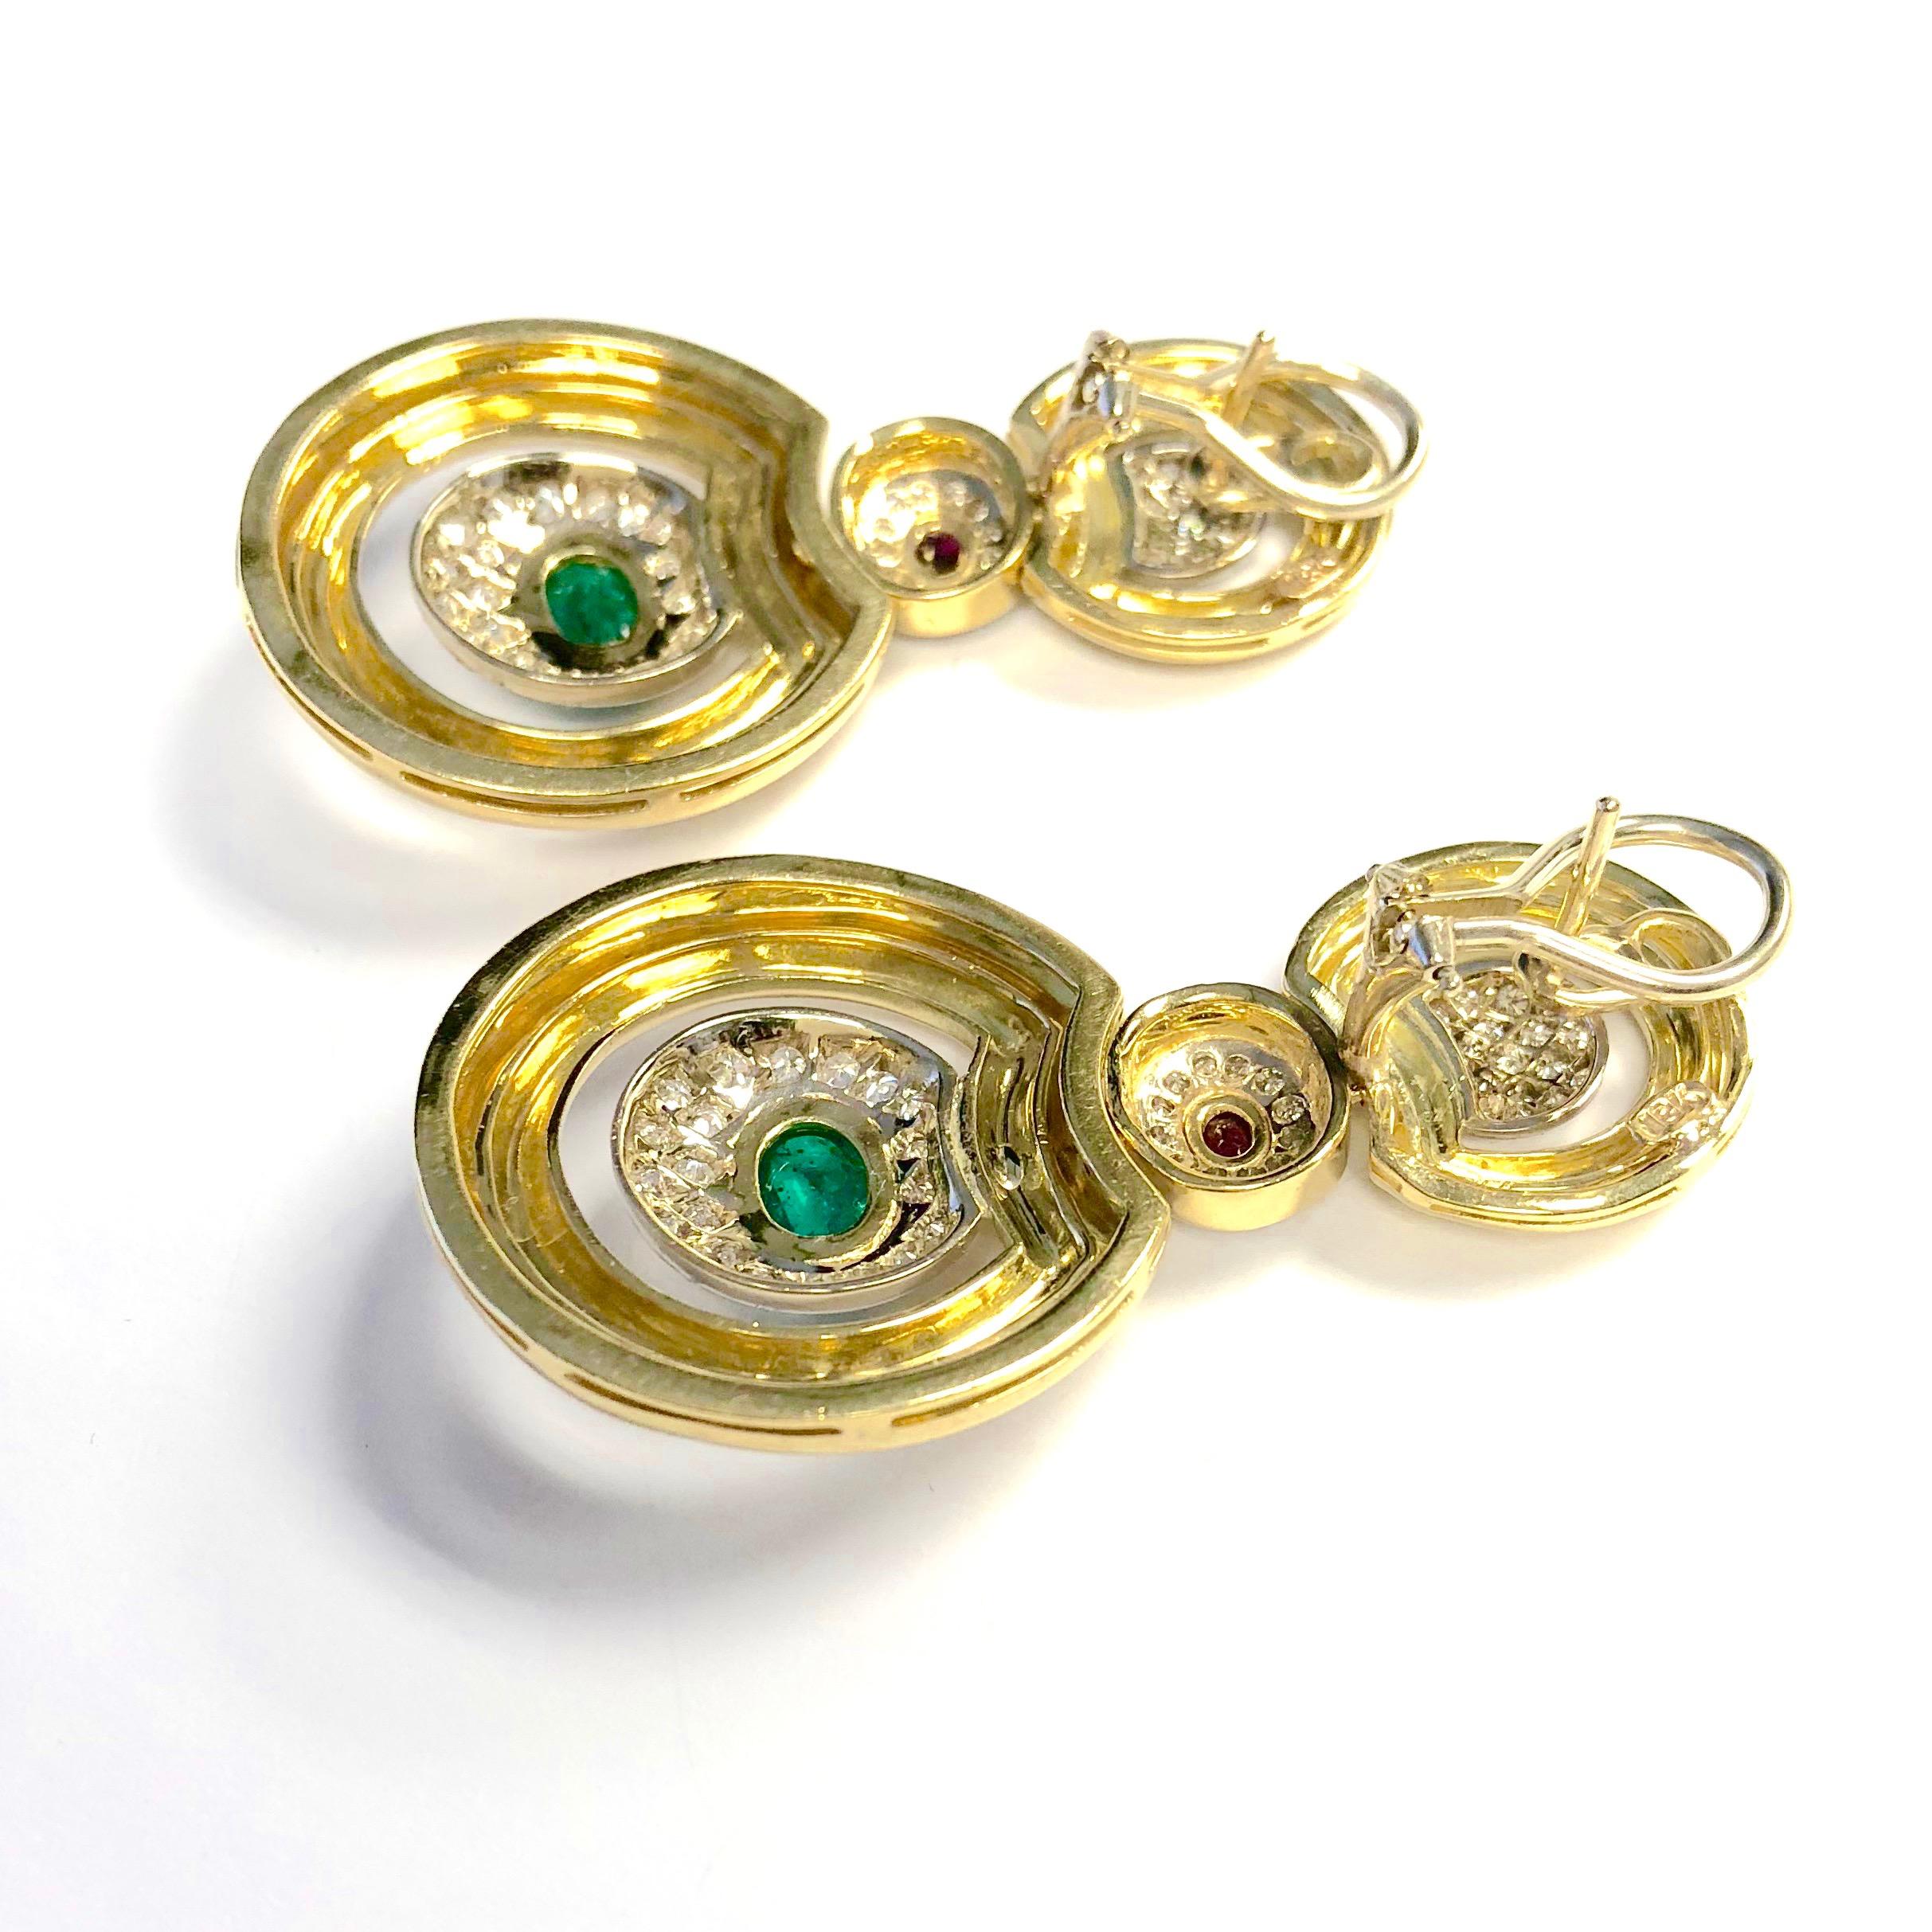 Crafted in 18K yellow gold, each earring features a circular design with emerald, ruby and diamond accents. Post and omega backings for added security. 
2 bezel set oval cabochon emeralds: approximate total weight of 2.00ct
2 bezel set oval cut